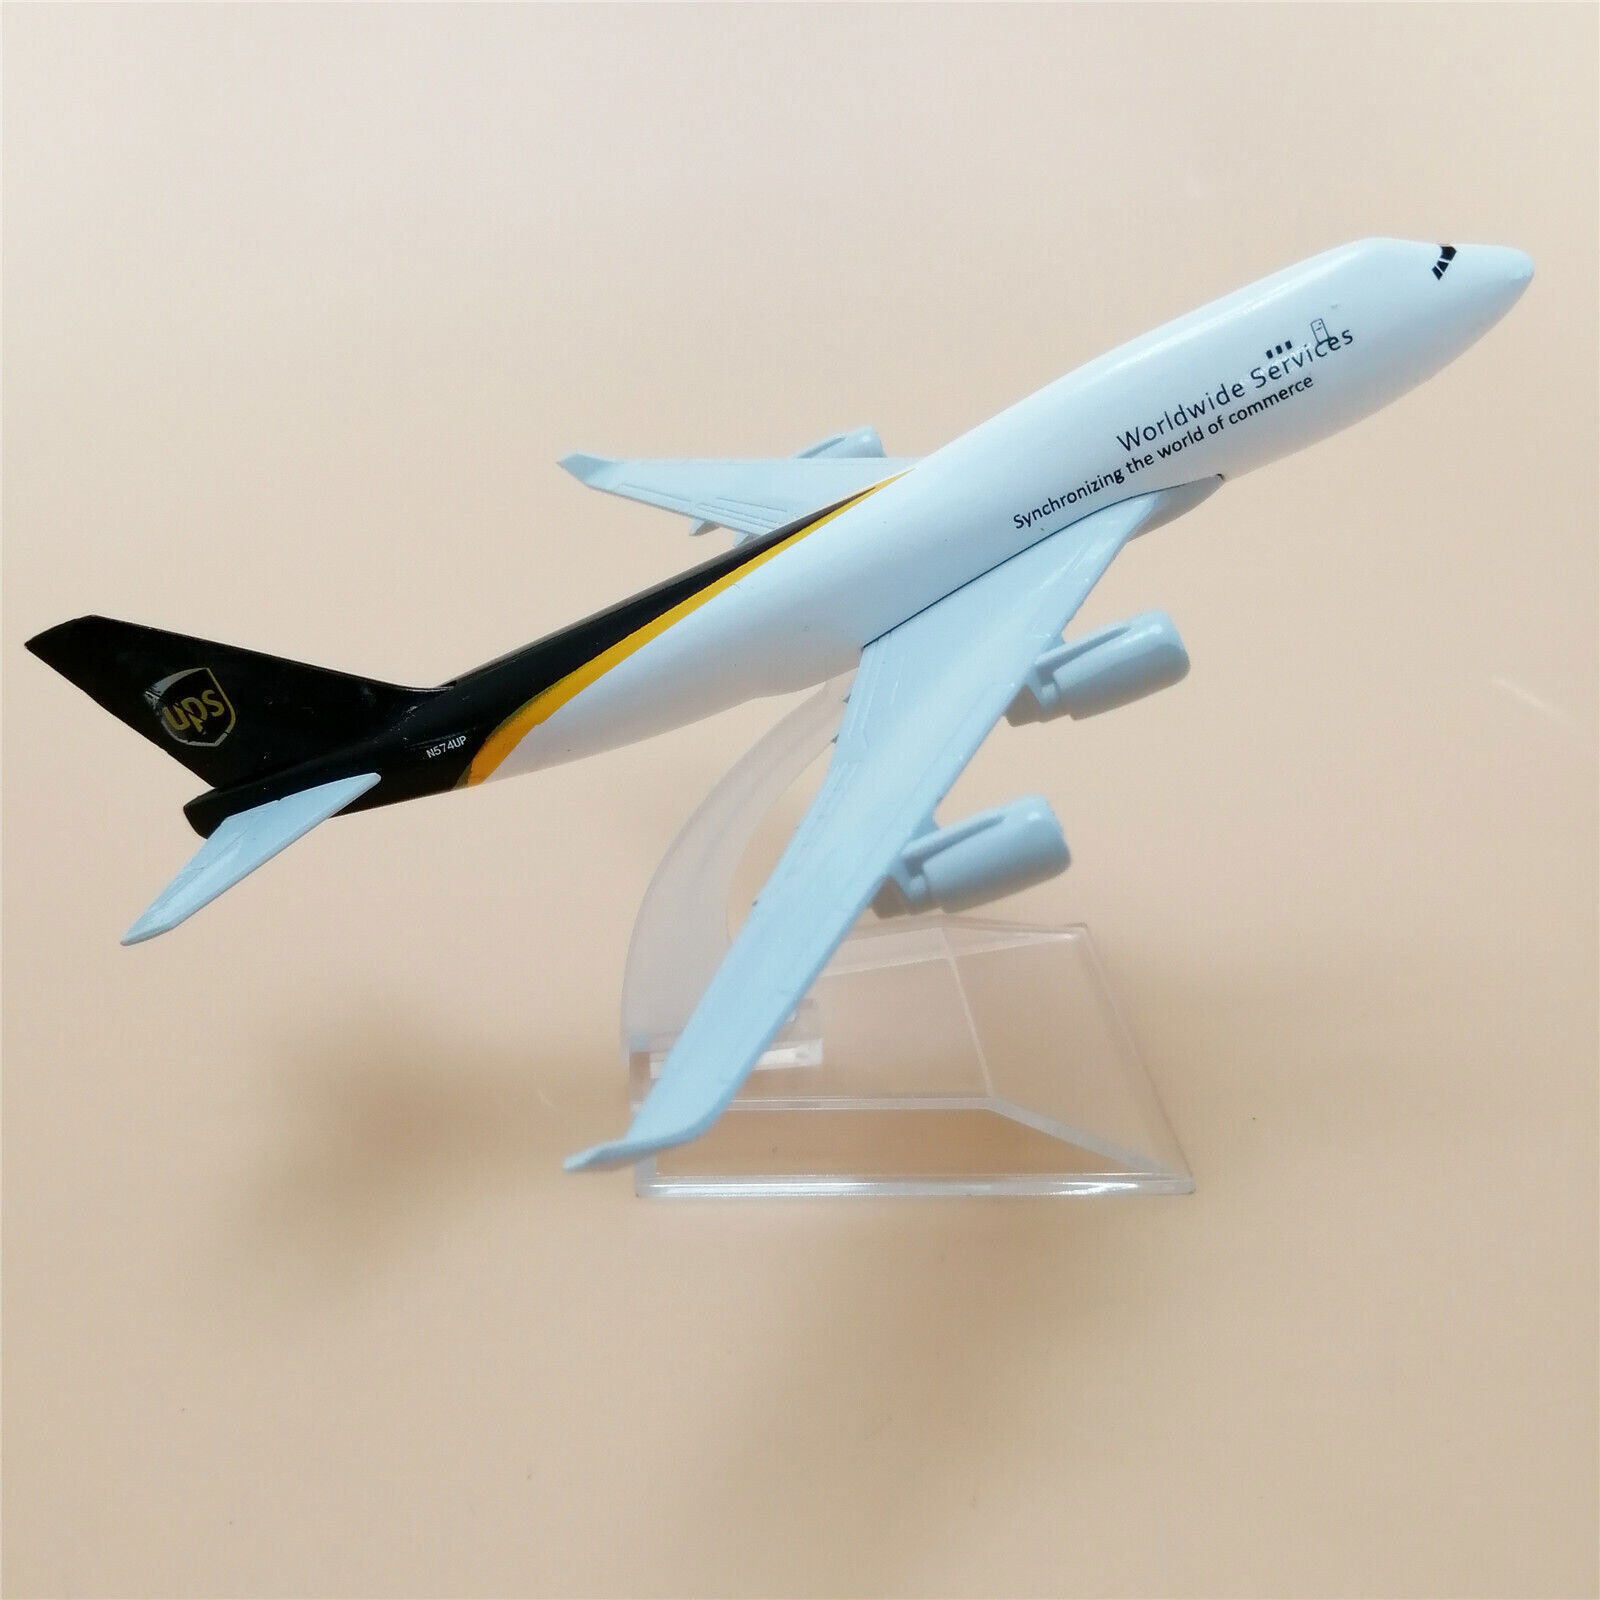 16cm UPS Boeing 747 Airlines Model B747 400 Aircraft Airplane Air Plane Toy